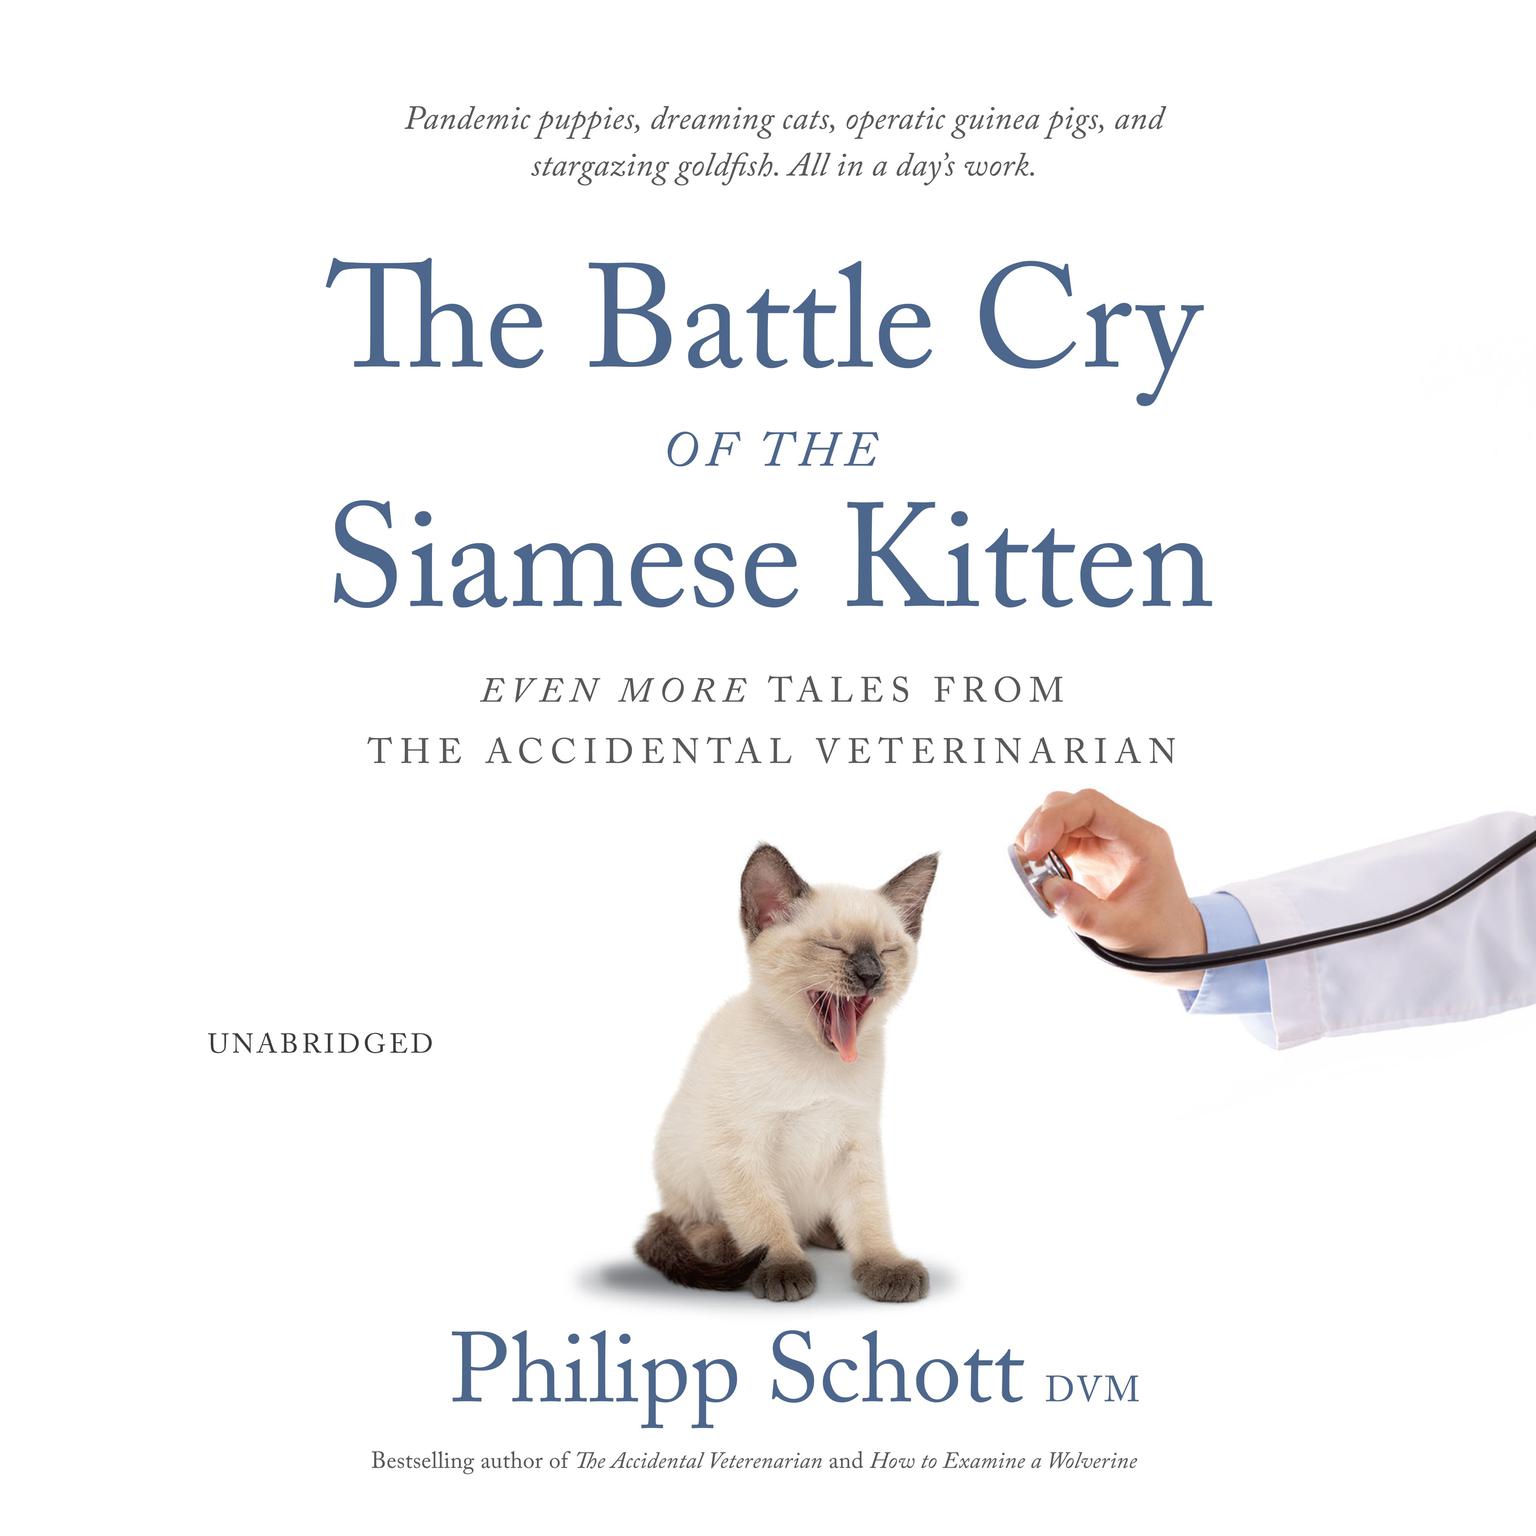 The Battle Cry of the Siamese Kitten: Even More Tales from the Accidental Veterinarian Audiobook, by Philipp Schott DVM